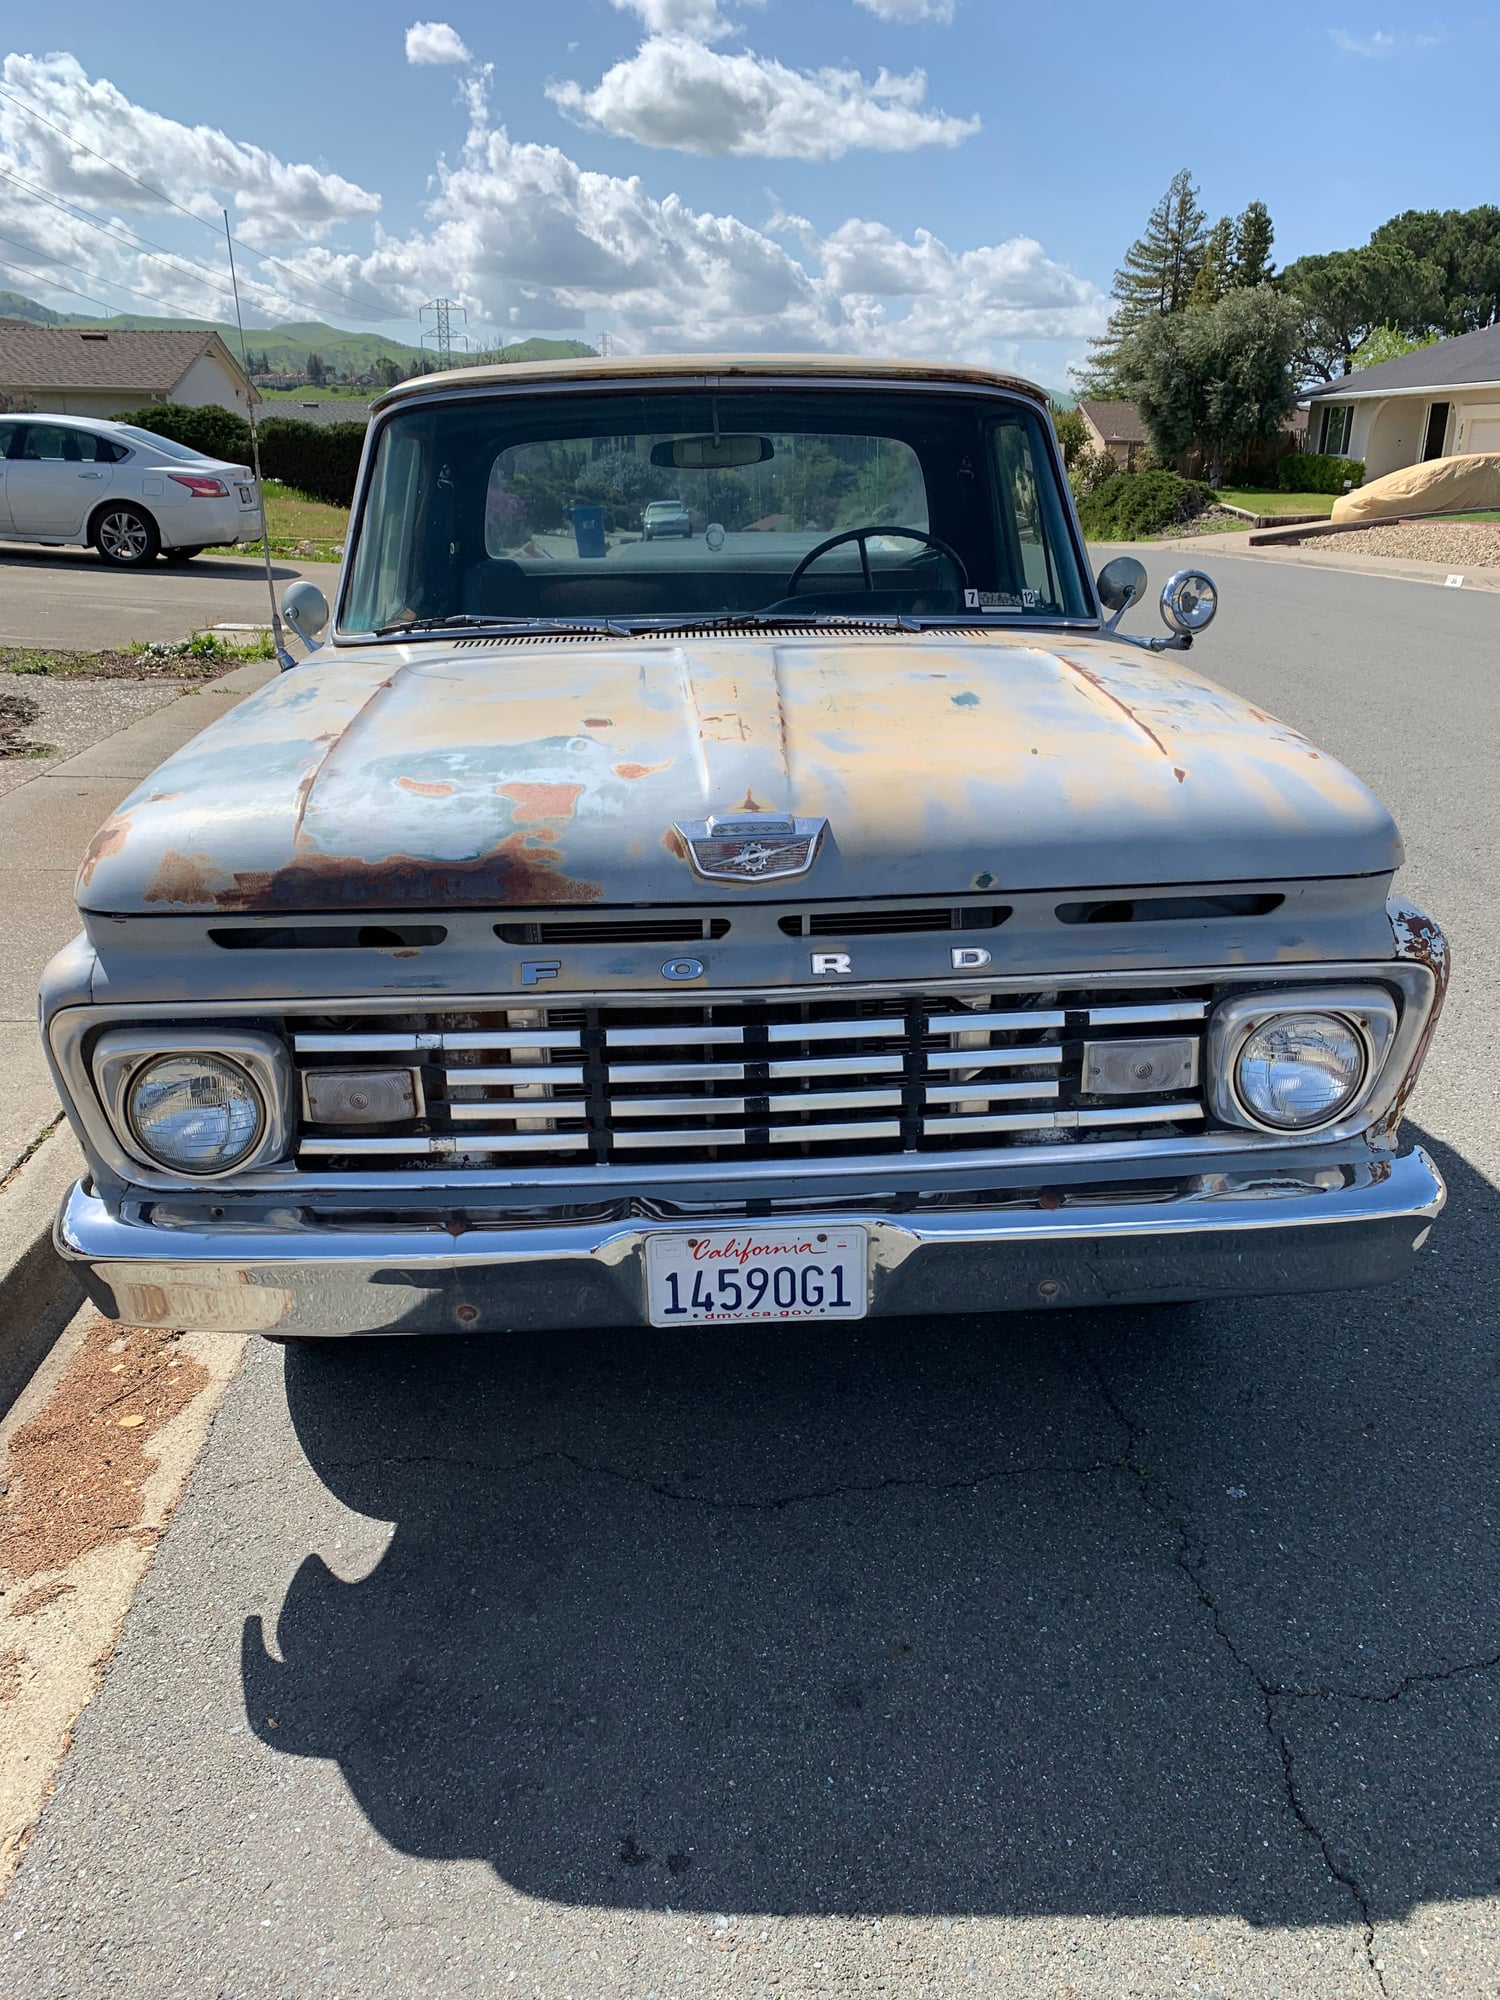 Exterior Body Parts - Looking for a 1962 F100 front Grille - Used - 1962 Ford 3/4 Ton Pickup - Antioch, CA 94509, United States